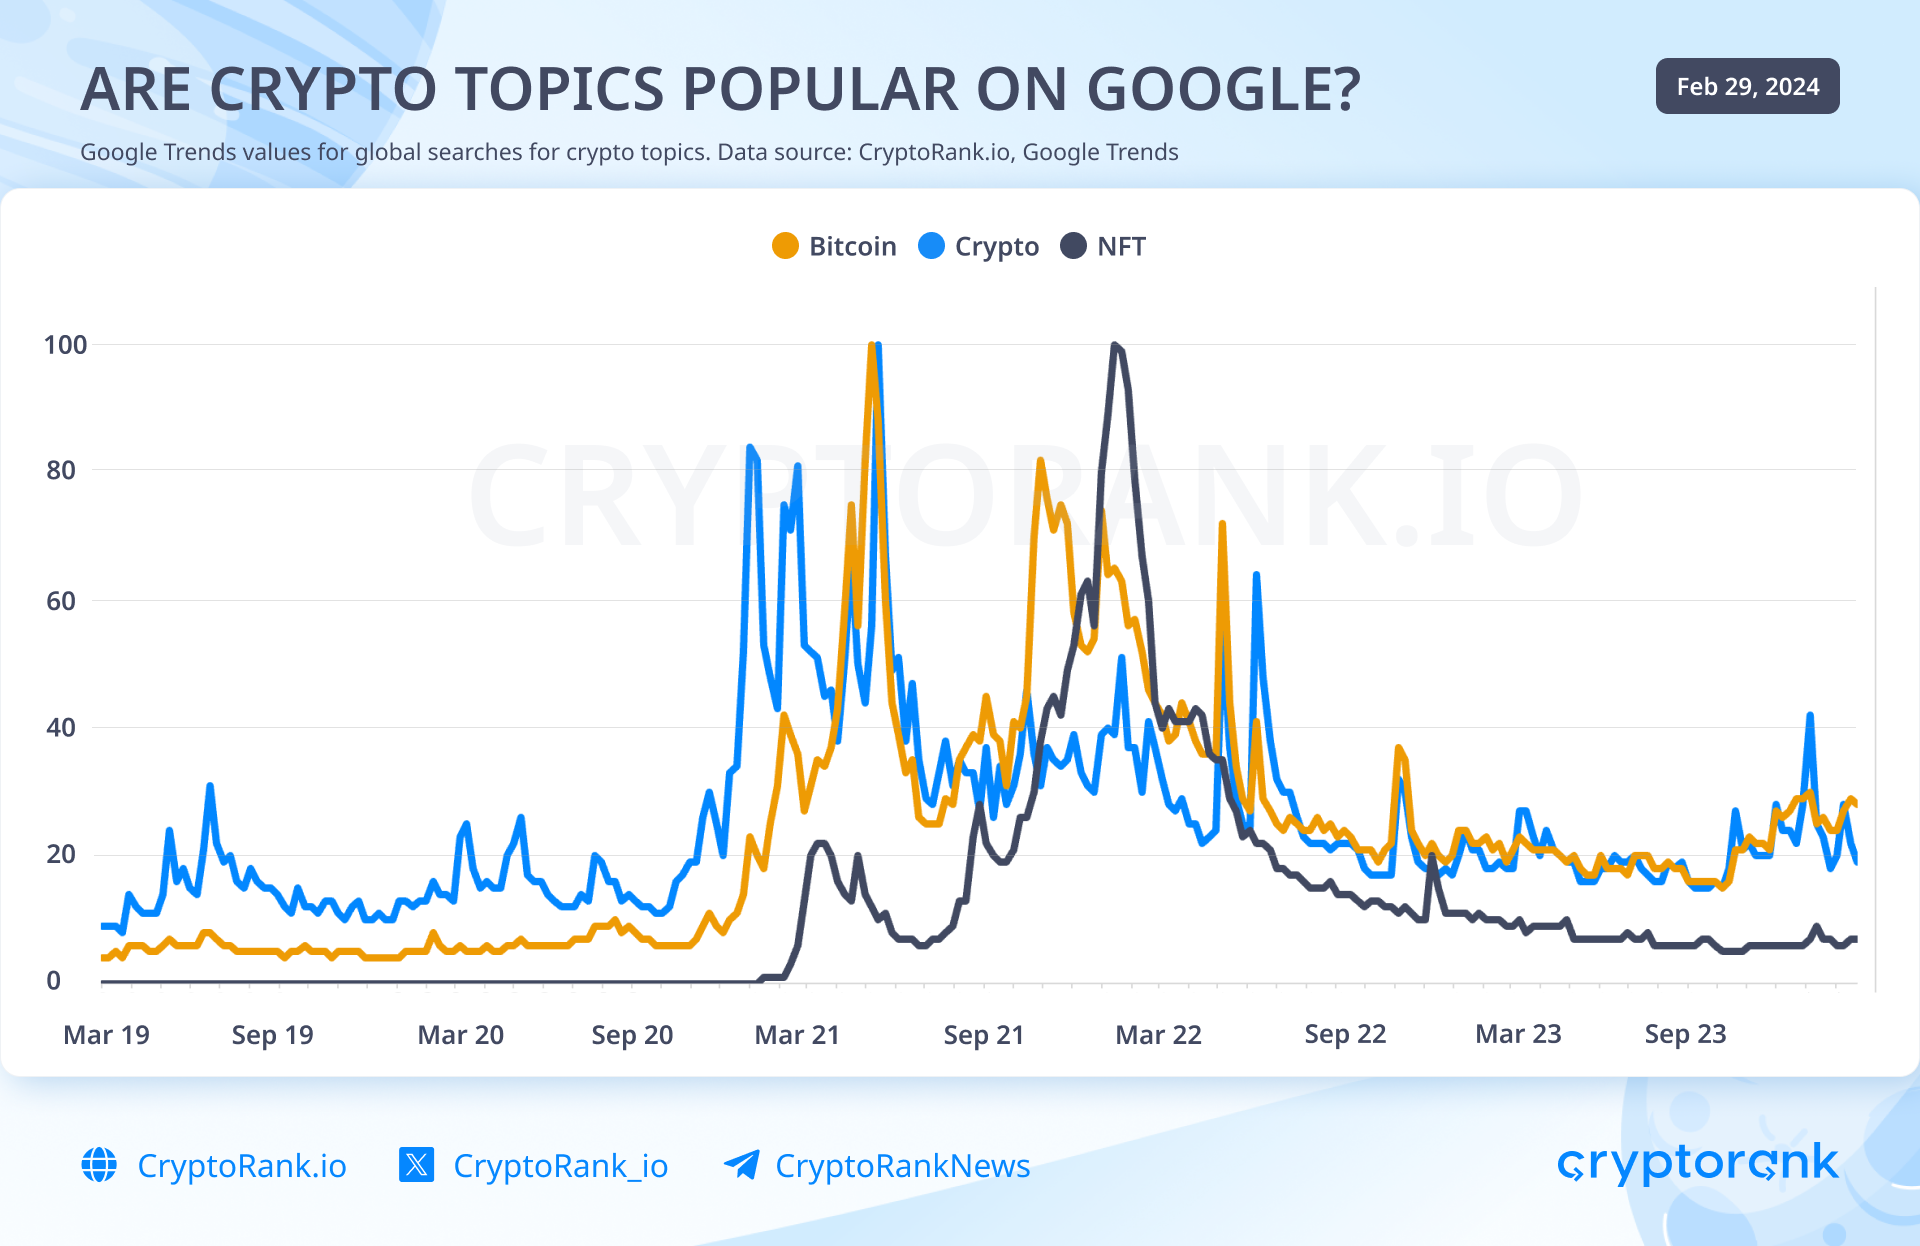 Google Trends Show Modest Interest in Crypto Topics Despite Bitcoin Nearing All Time High